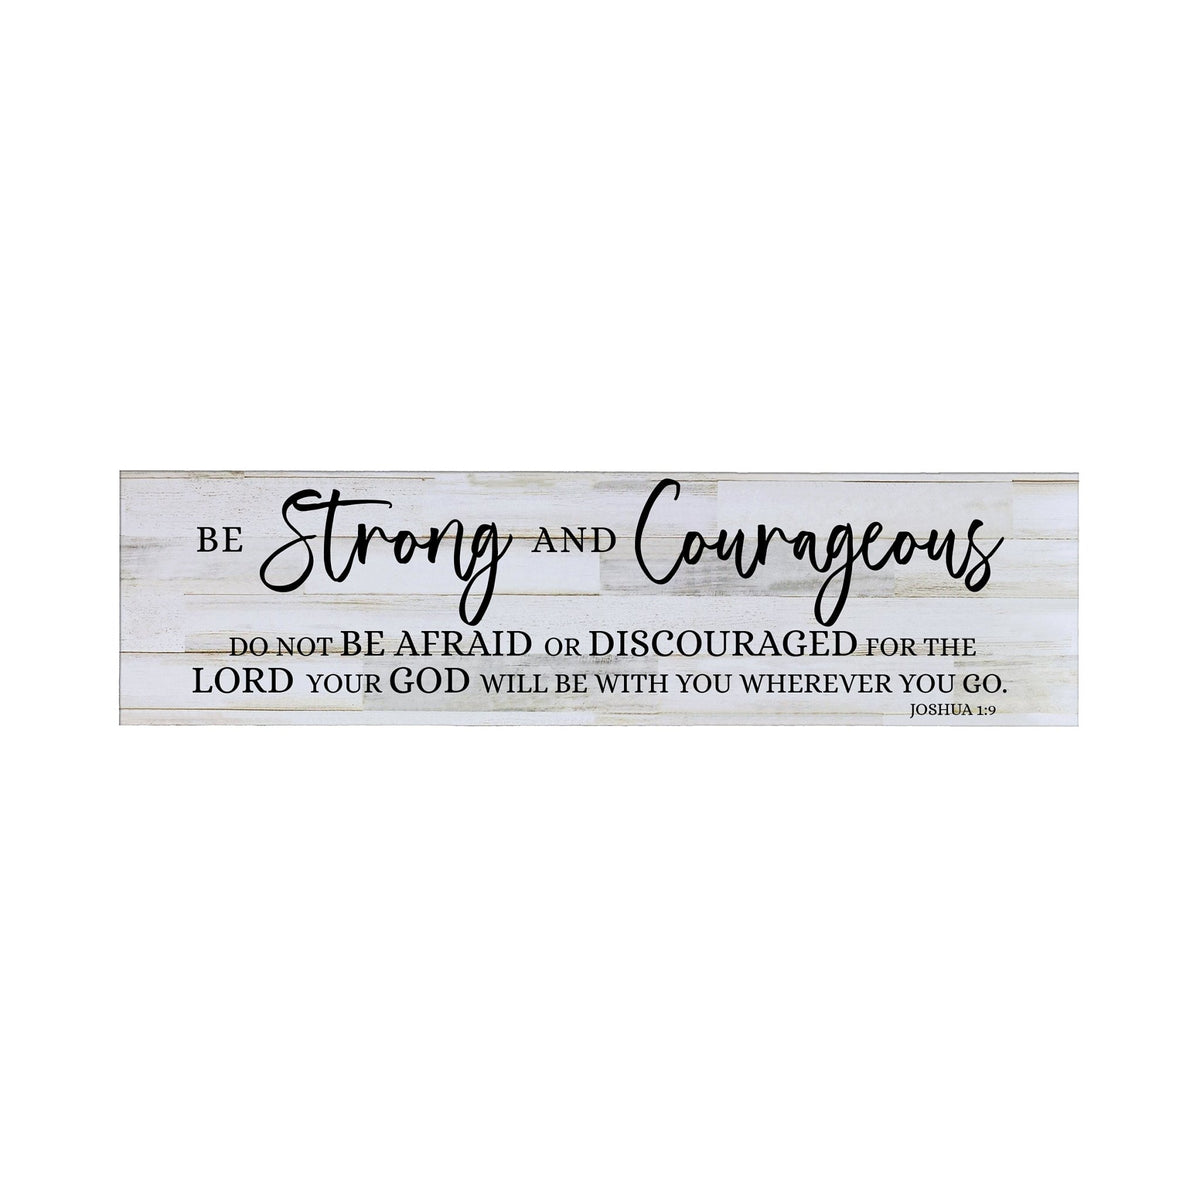 Inspirational Modern Wooden Wall Hanging Plaque 10x40 - Be Strong And Courageous - LifeSong Milestones